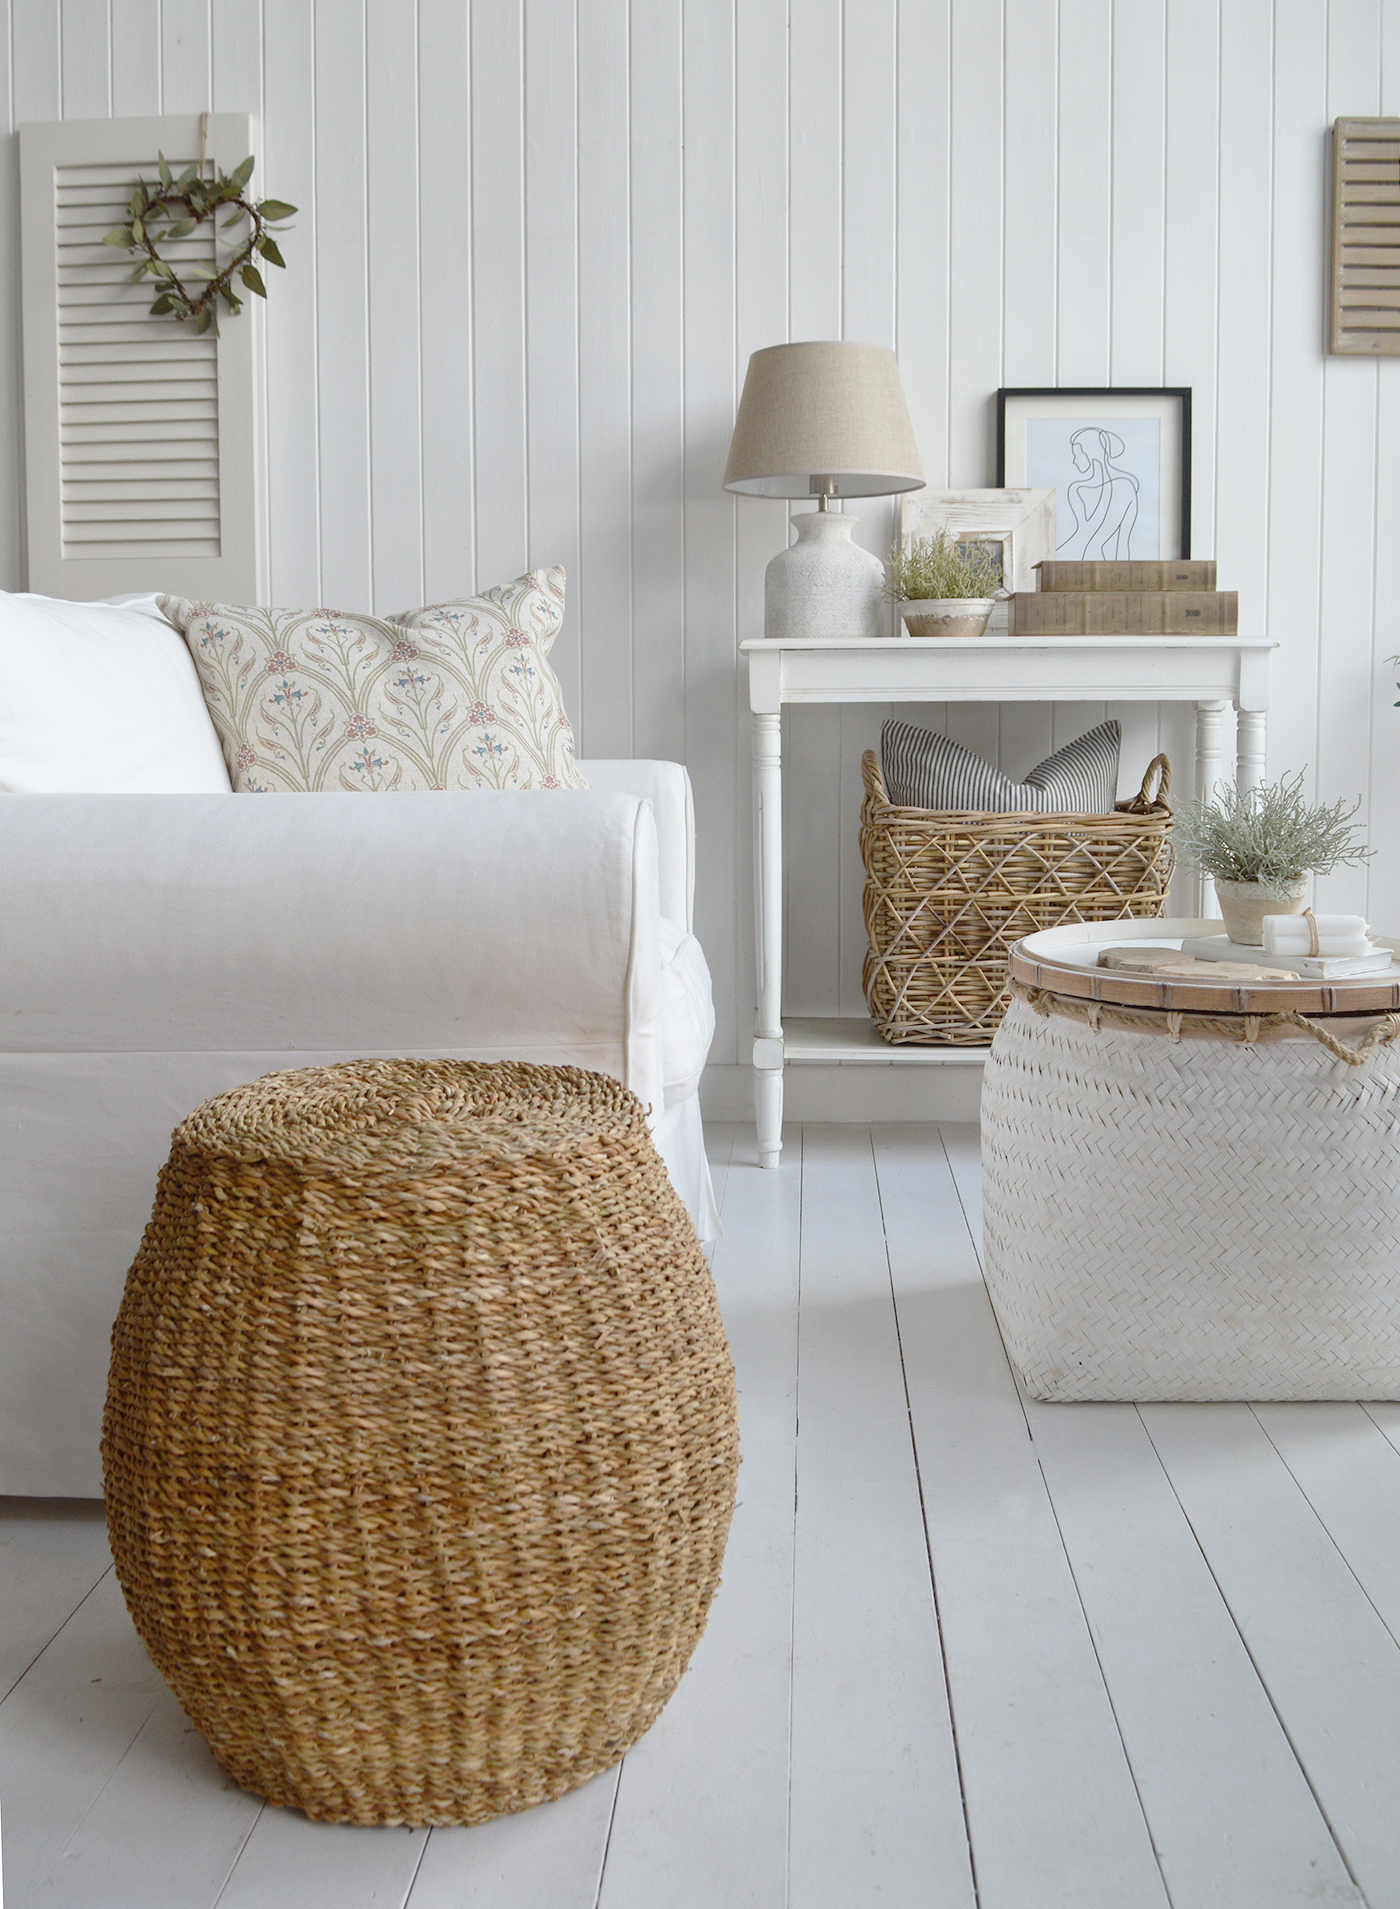 The Cove Bay stool, shown in a New England beach house Hamptons styled interior